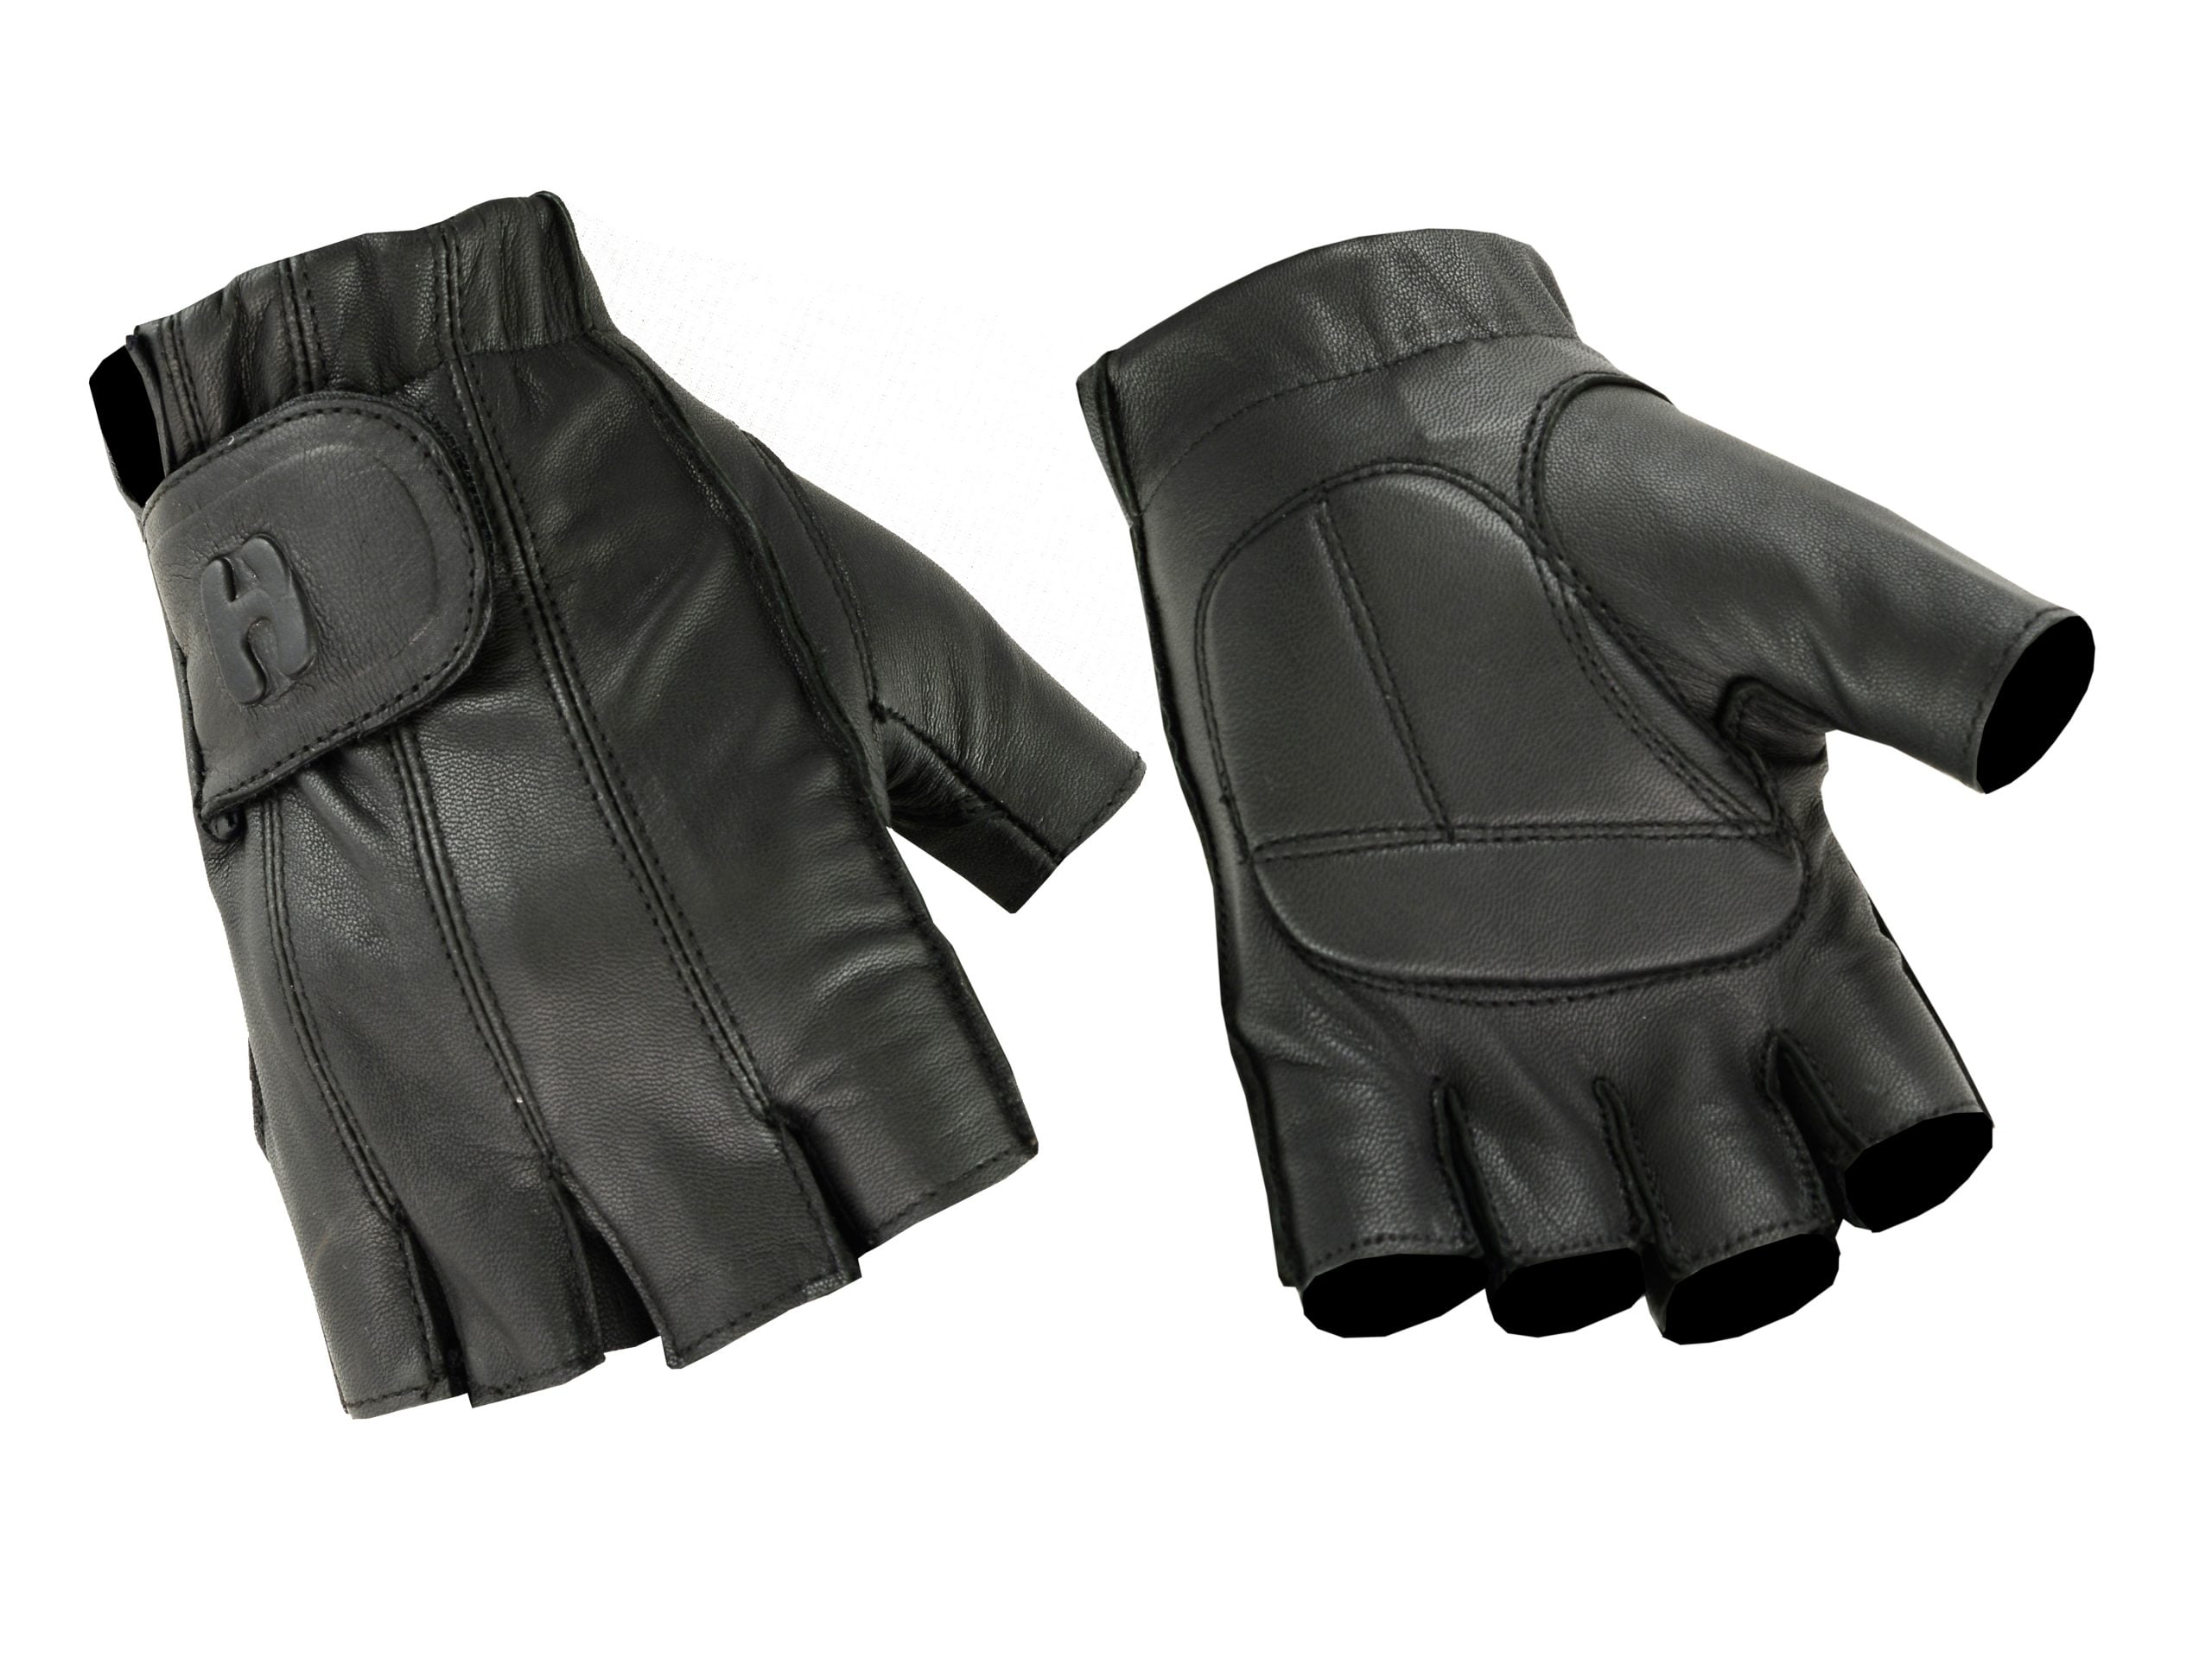 Leather Gloves Weight lifting gloves Cycling Motorbike Rider Biker Black Gloves 